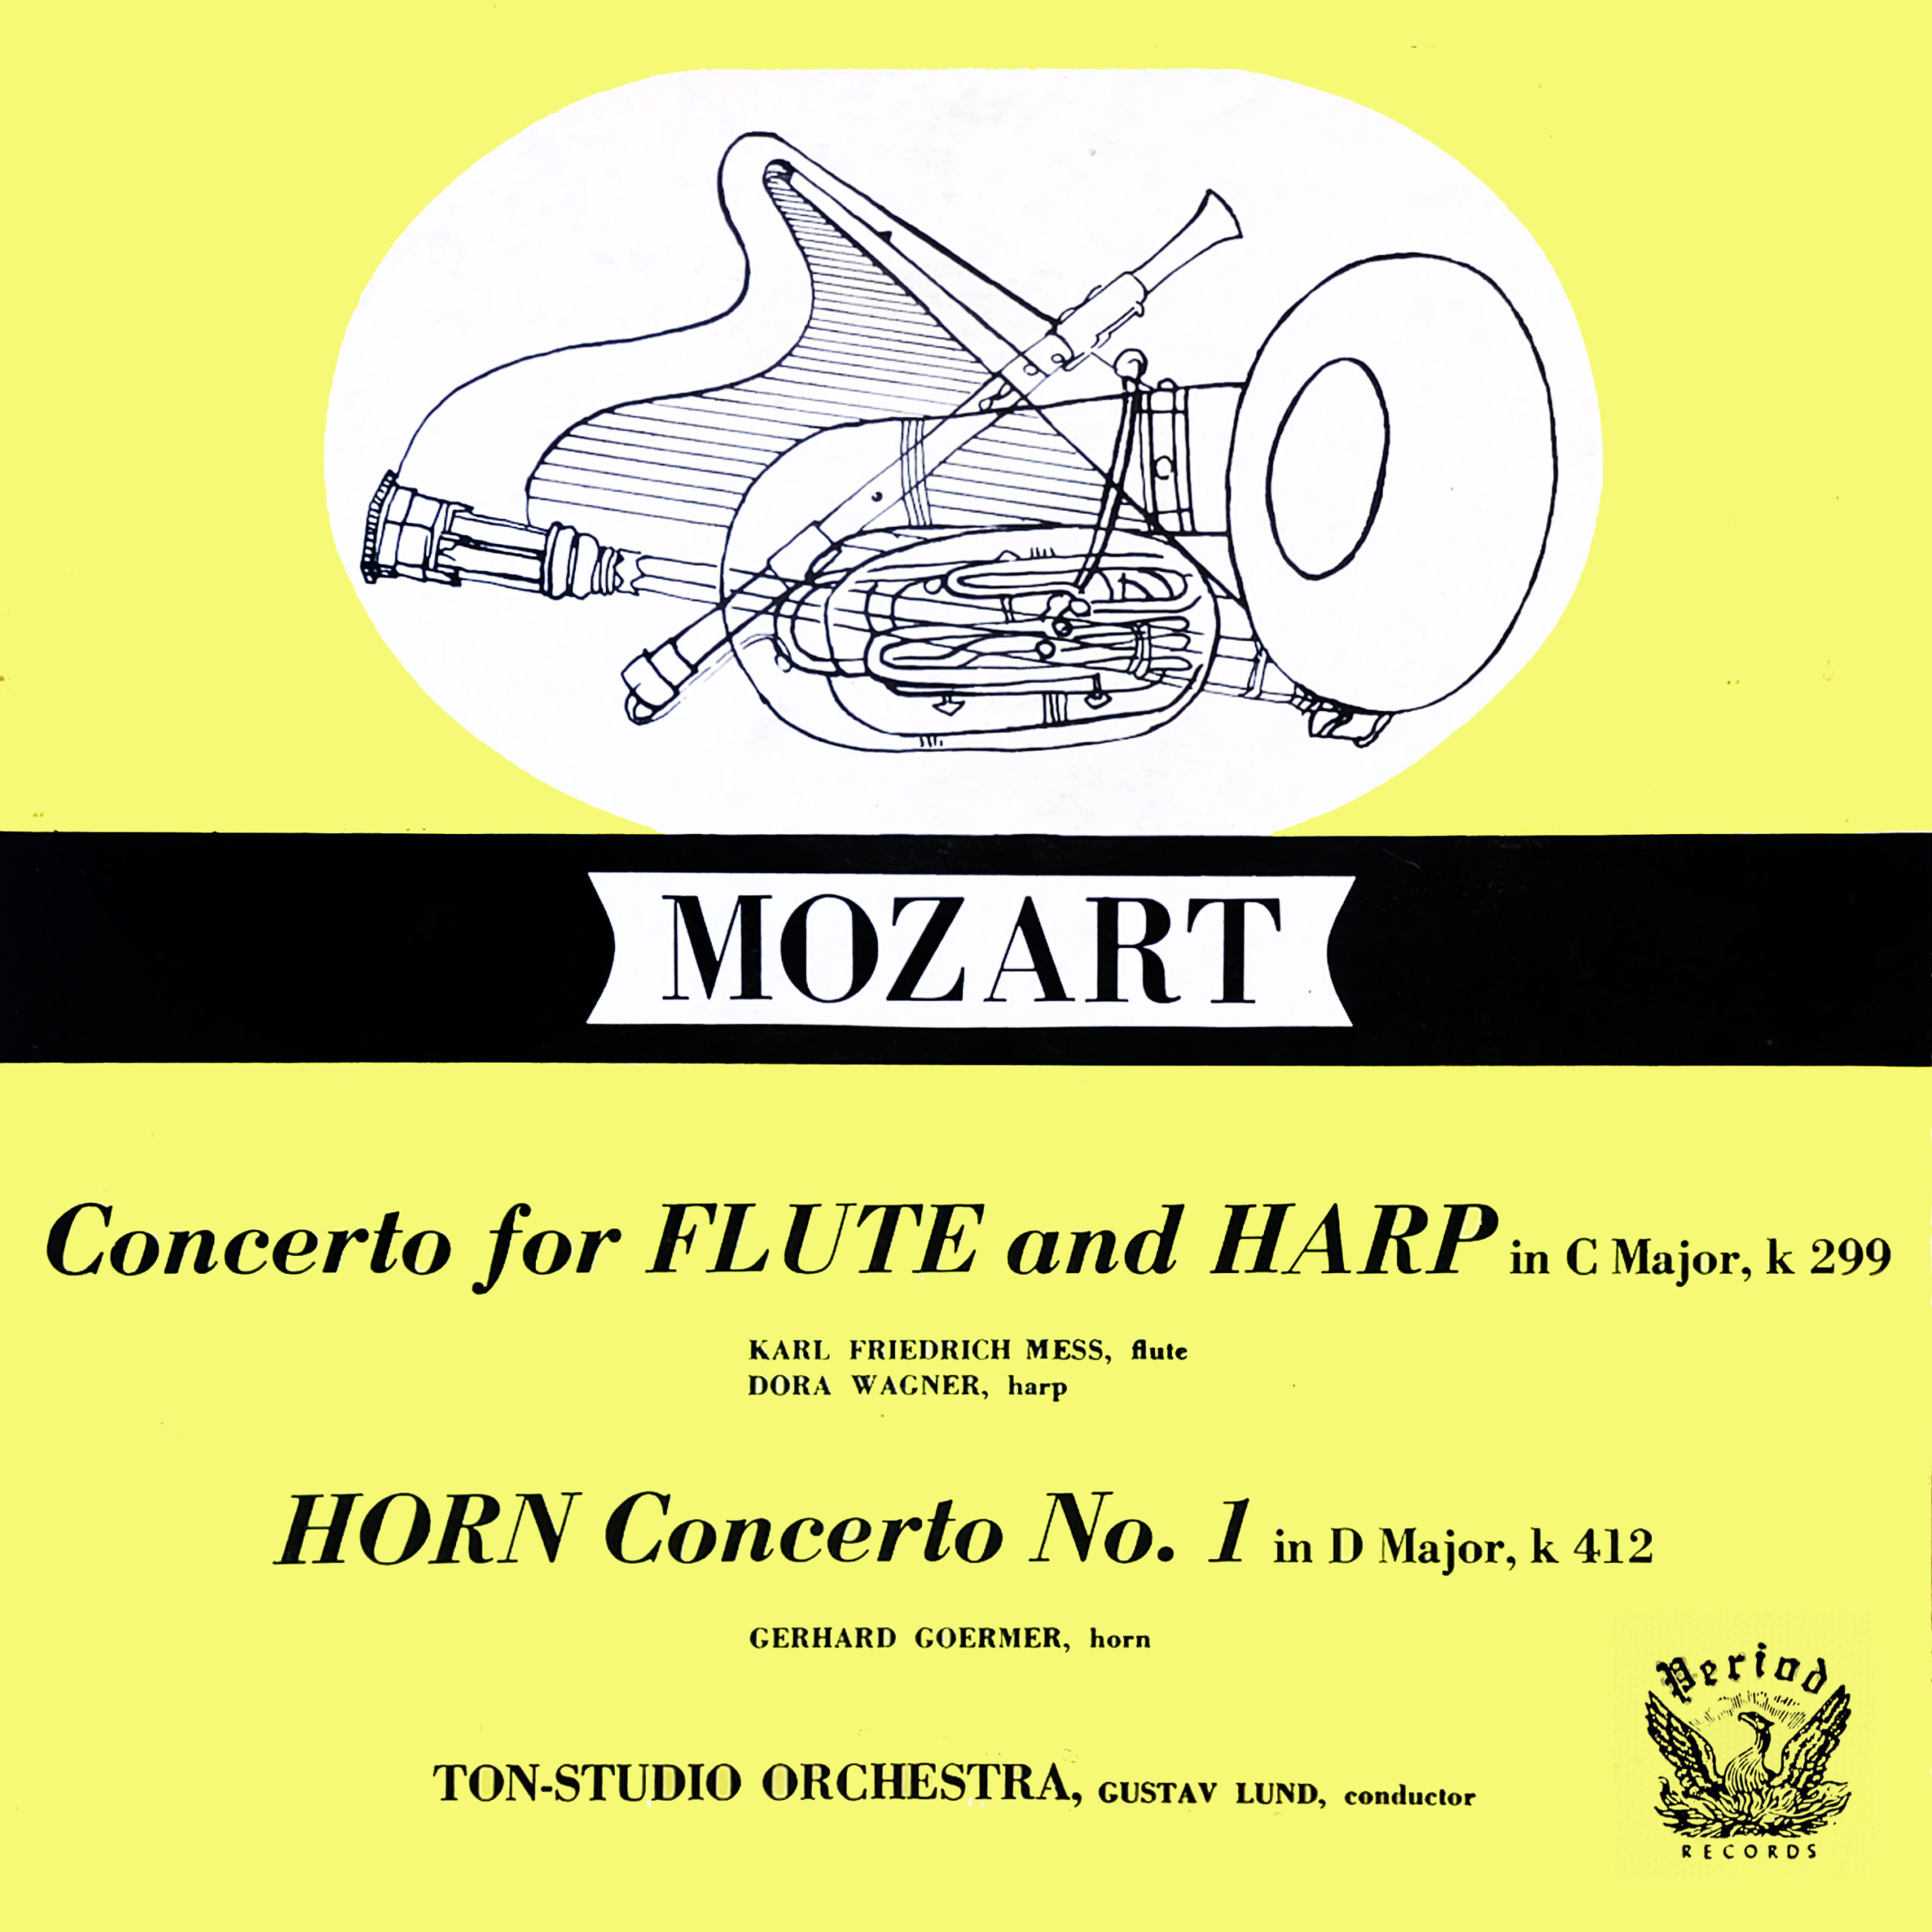 Concerto For Flute And Harp copy